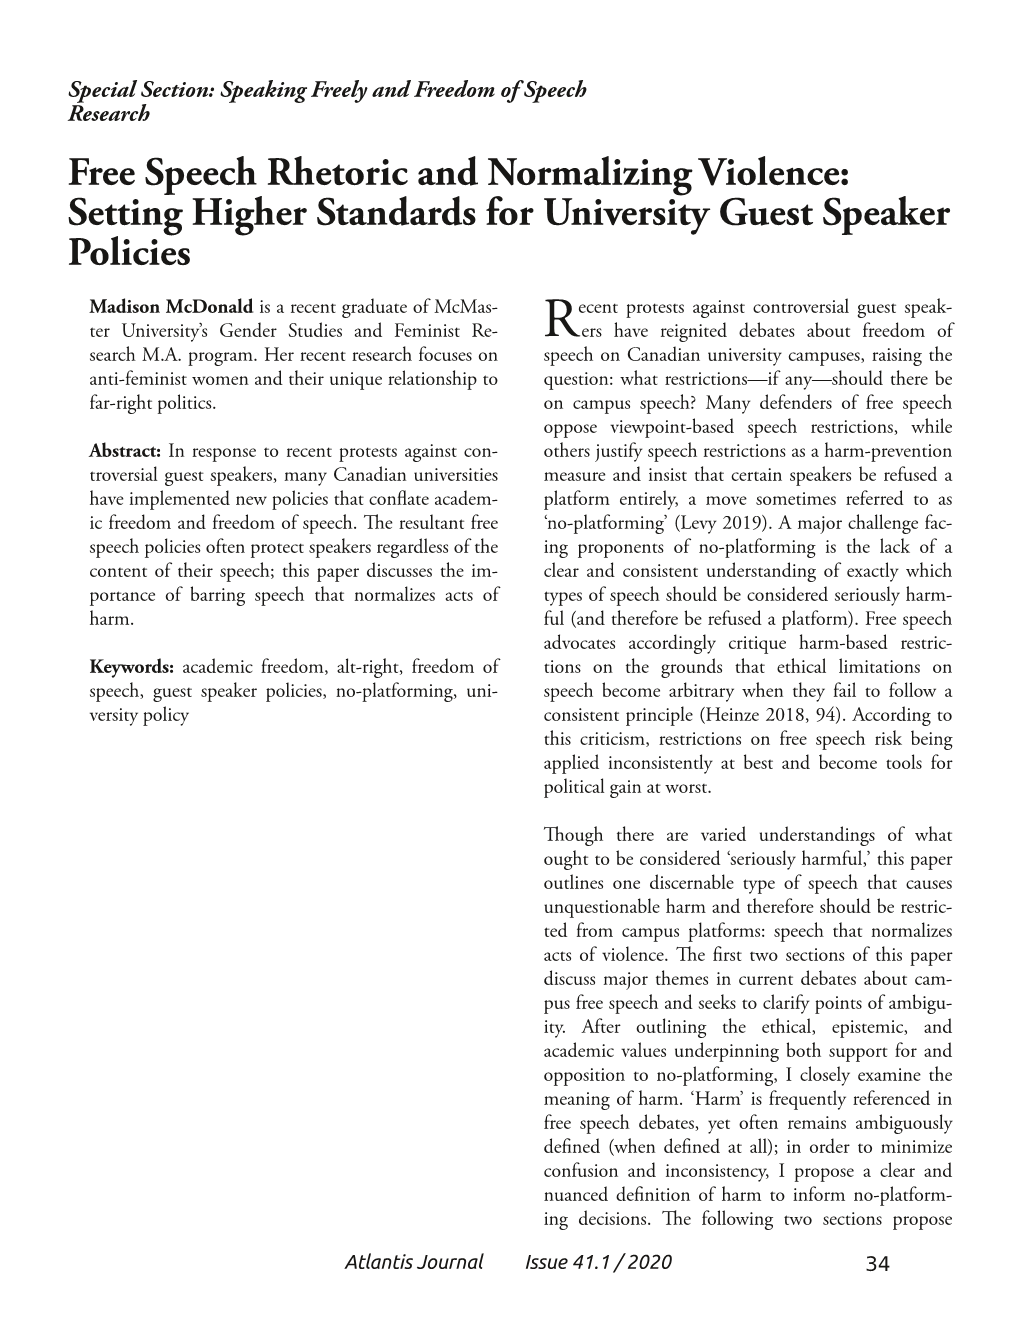 Free Speech Rhetoric and Normalizing Violence: Setting Higher Standards for University Guest Speaker Policies